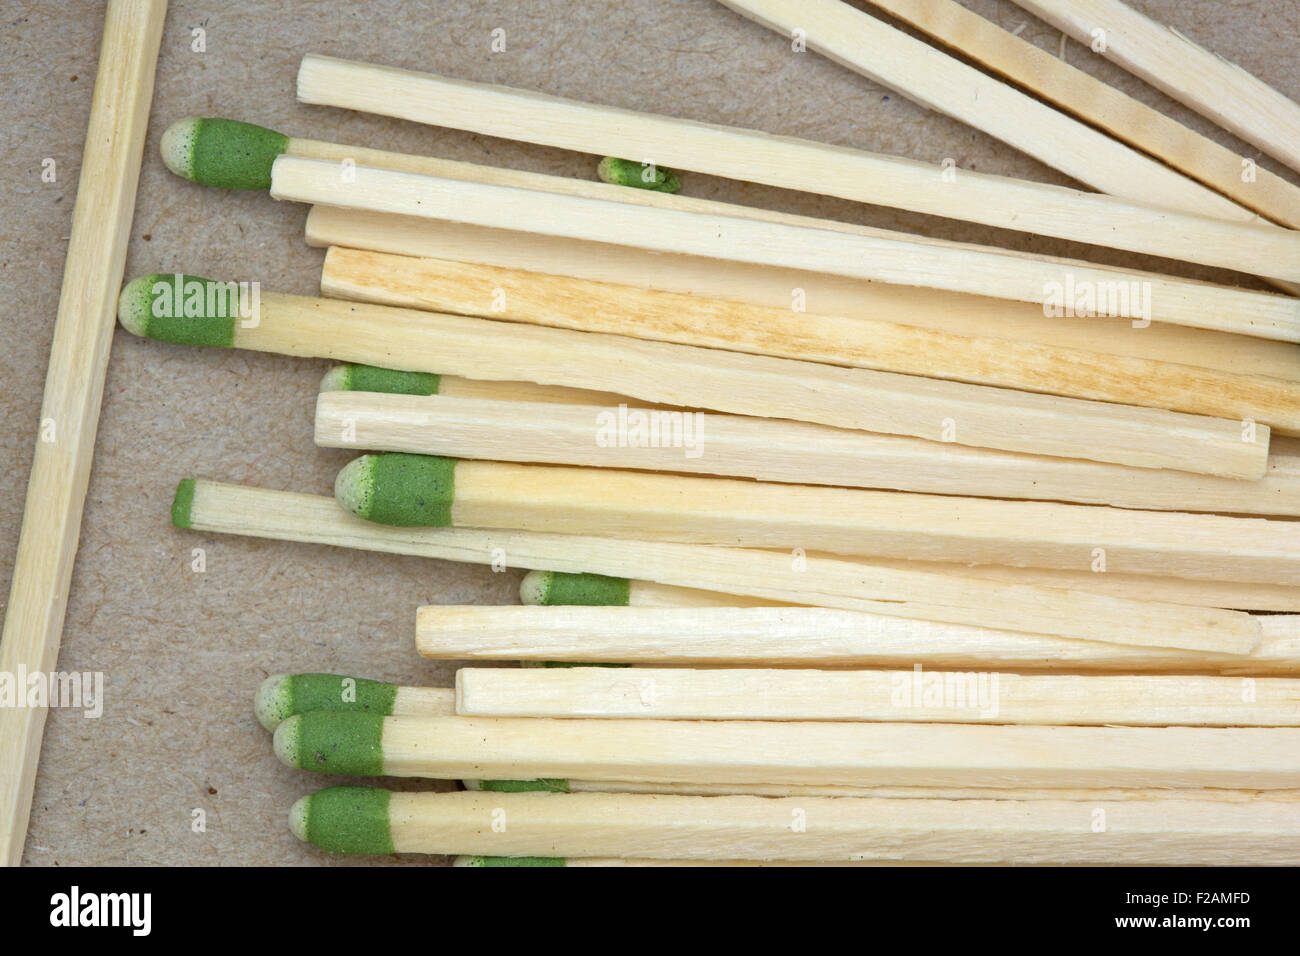 Top close view of large kitchen matches in the bottom of a cardboard box. Stock Photo